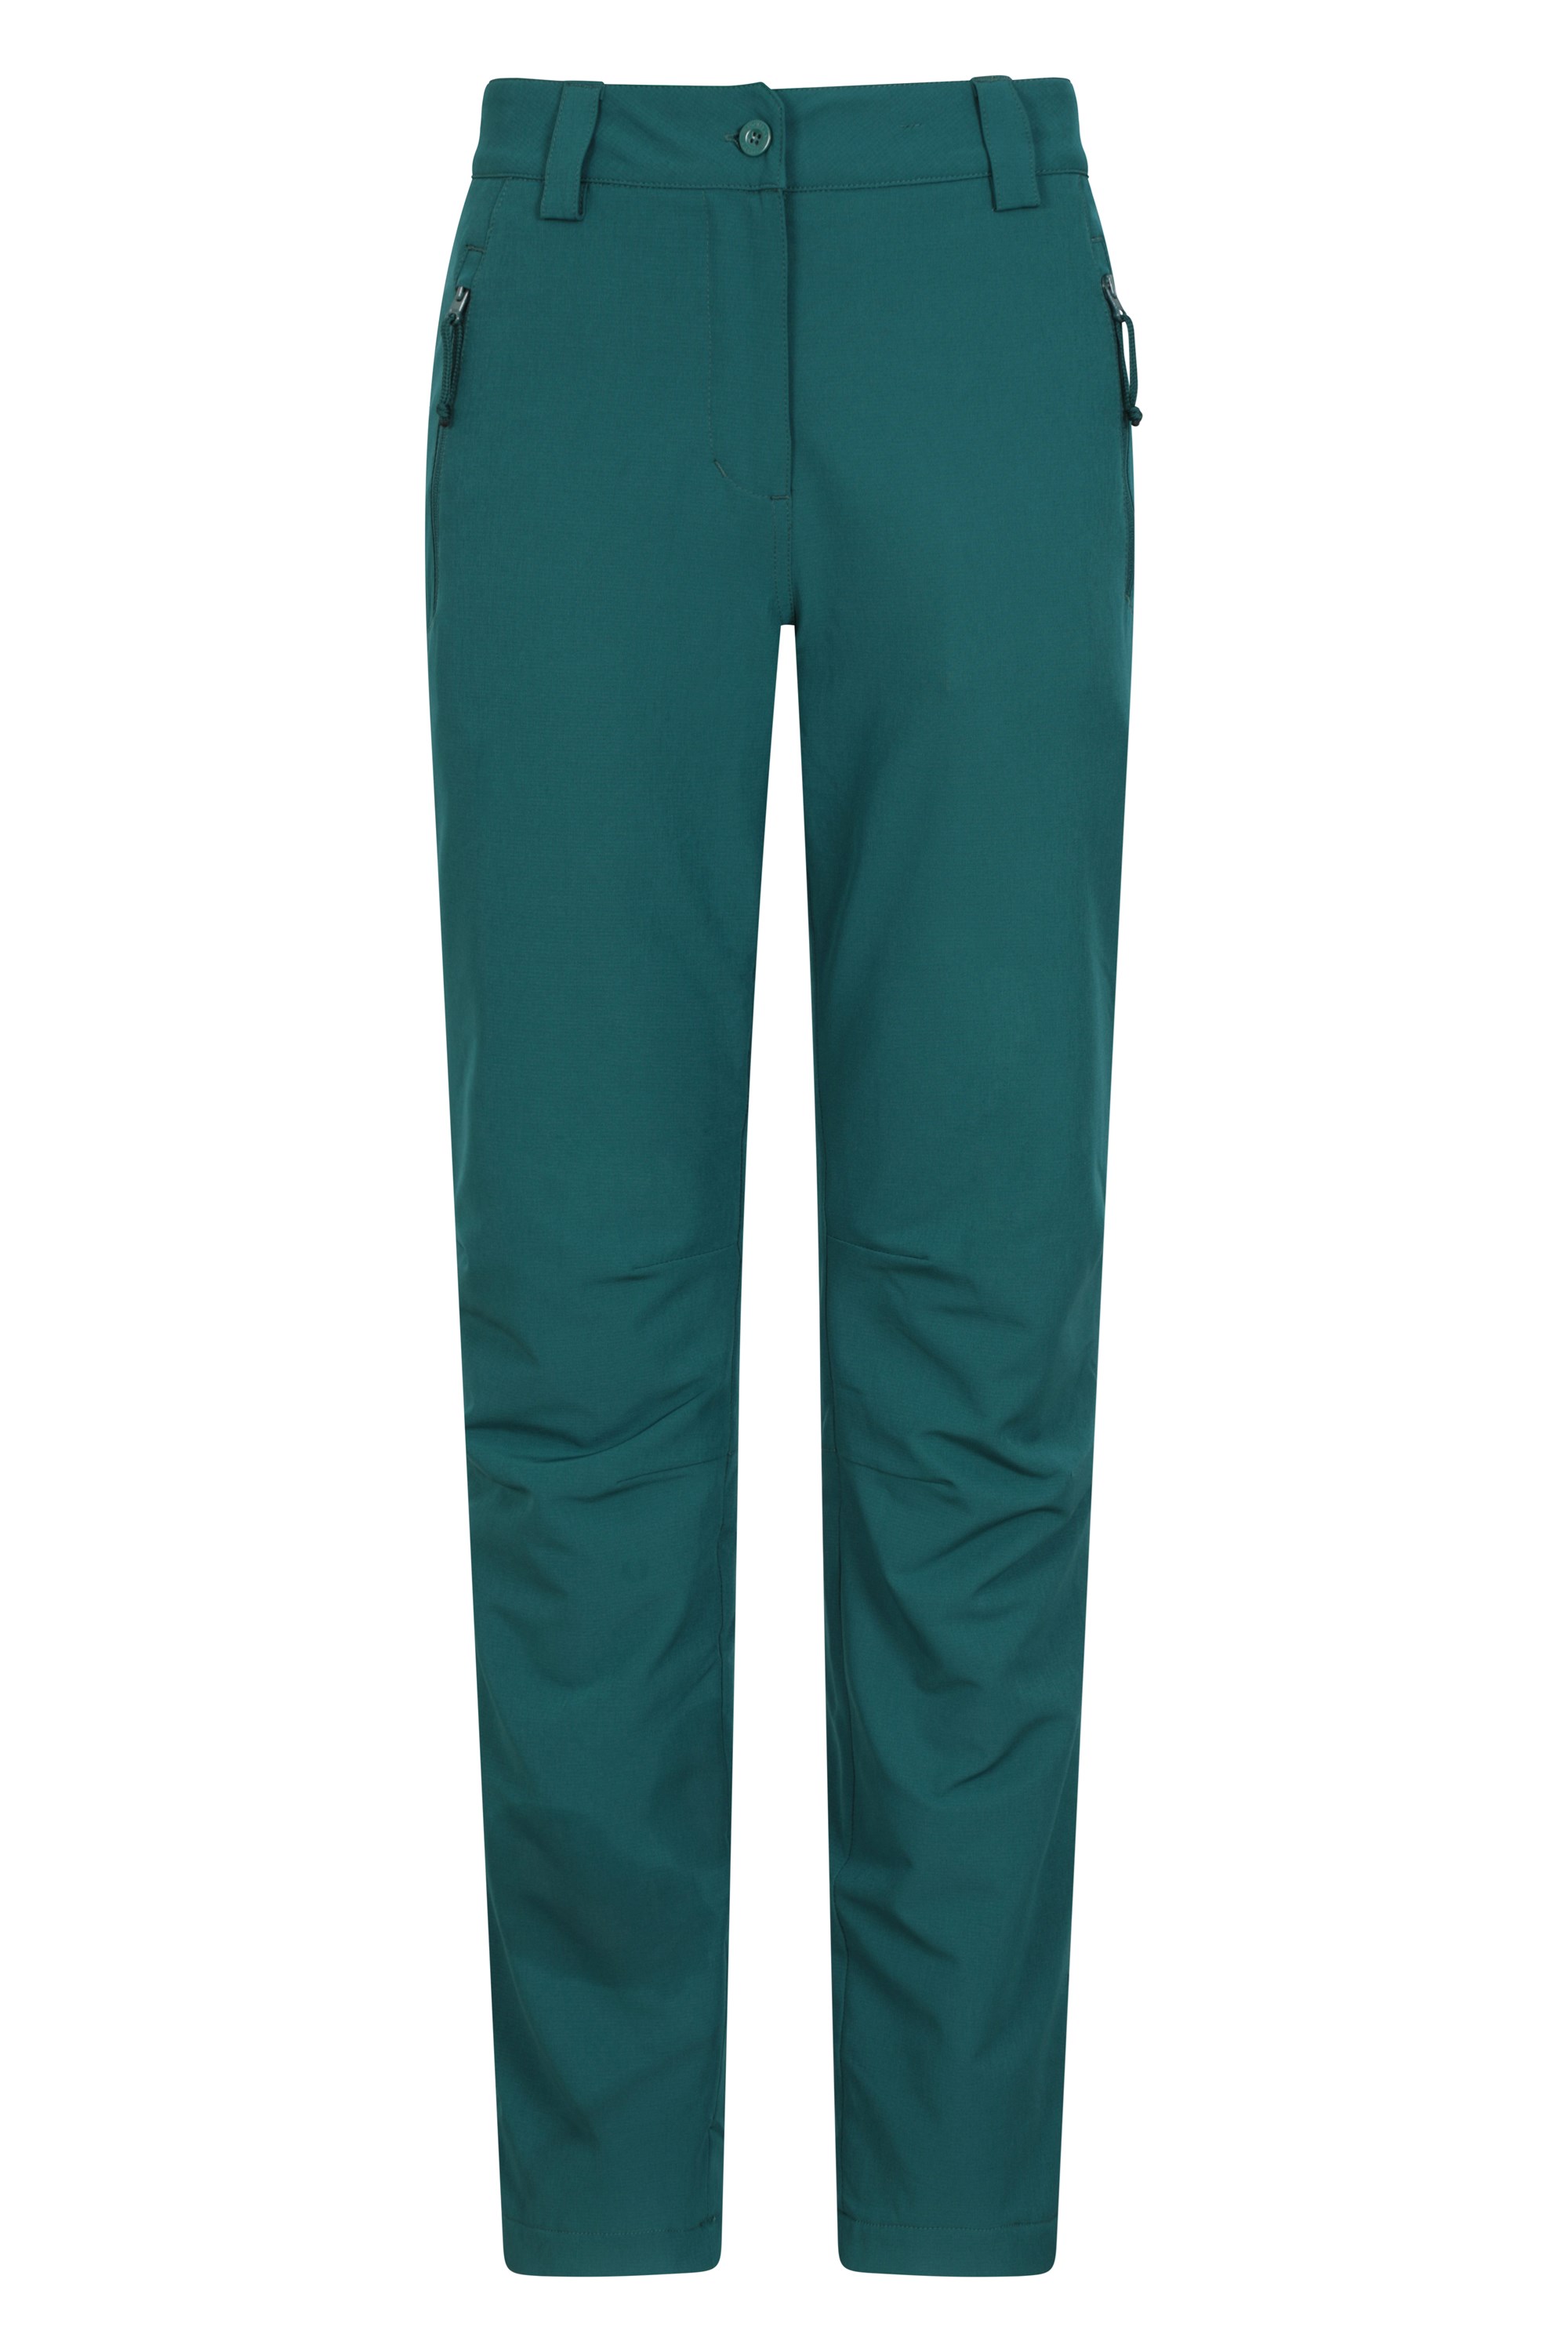 Arctic Ii Womens Thermal Fleece Lined Trousers - Short Length - Green